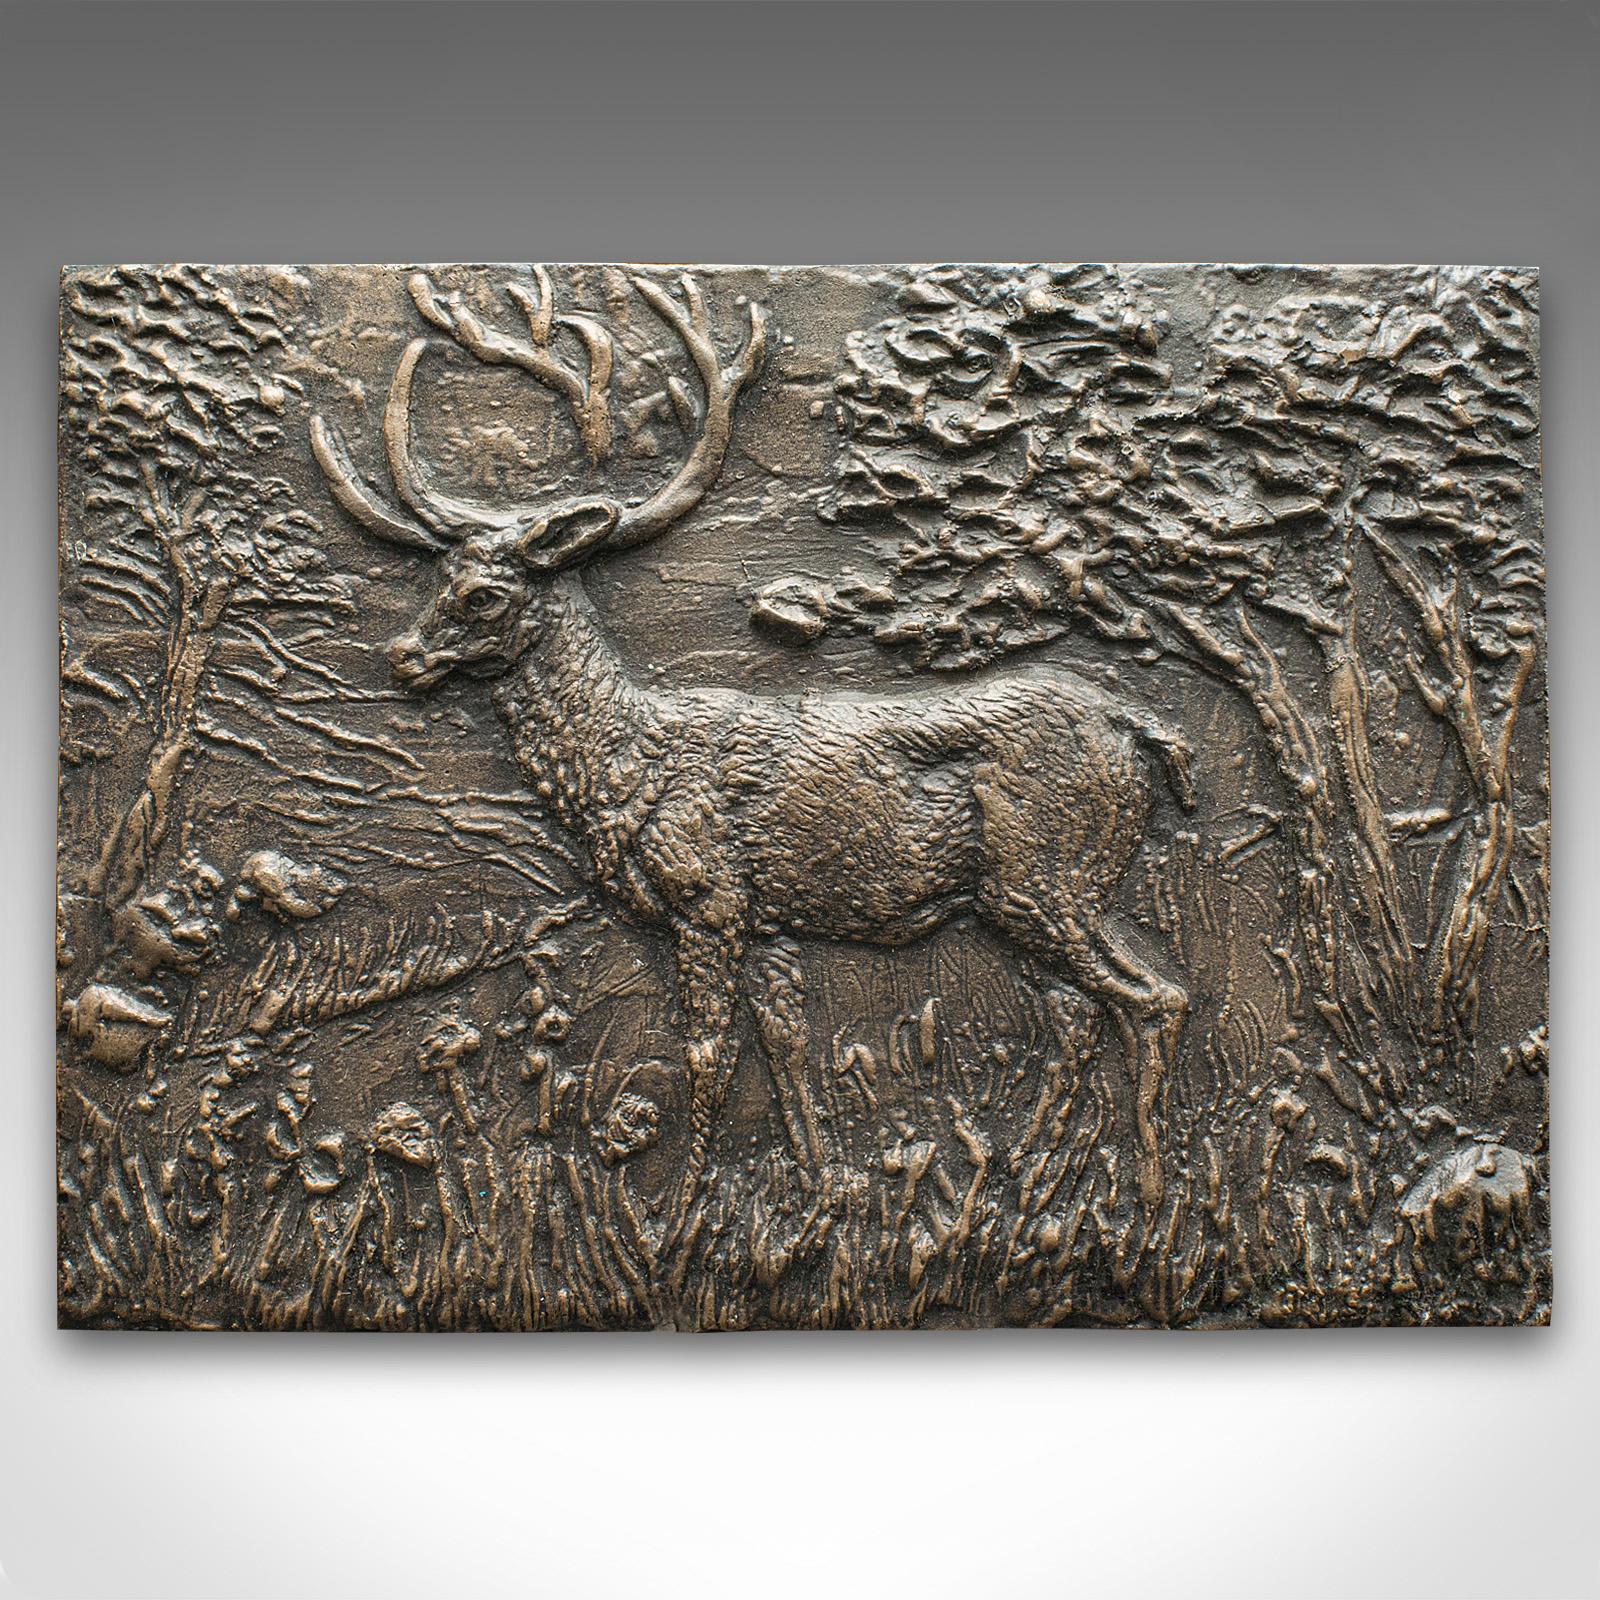 This is a vintage stag relief plaque. An English, bronze decorative plate, dating to the mid 20th century, circa 1950.

Delightfully weathered appearance with country house appeal
Displaying a desirable aged patina and in original order
Bronze